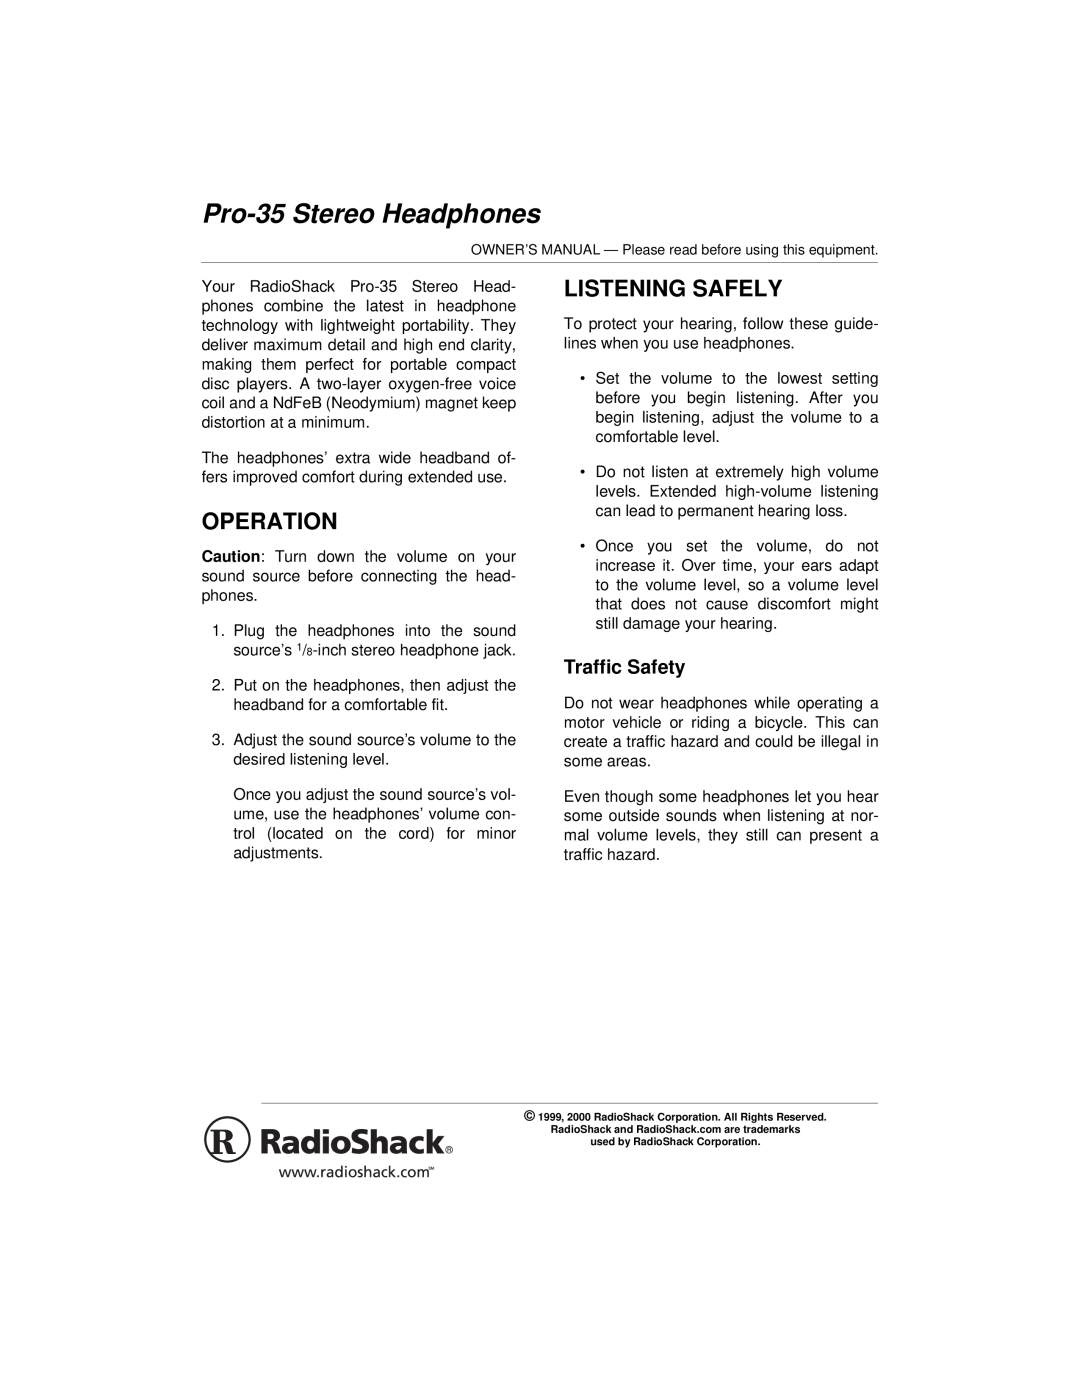 Radio Shack PRO-35 owner manual Operation, Listening Safely, Pro-35Stereo Headphones, Traffic Safety 